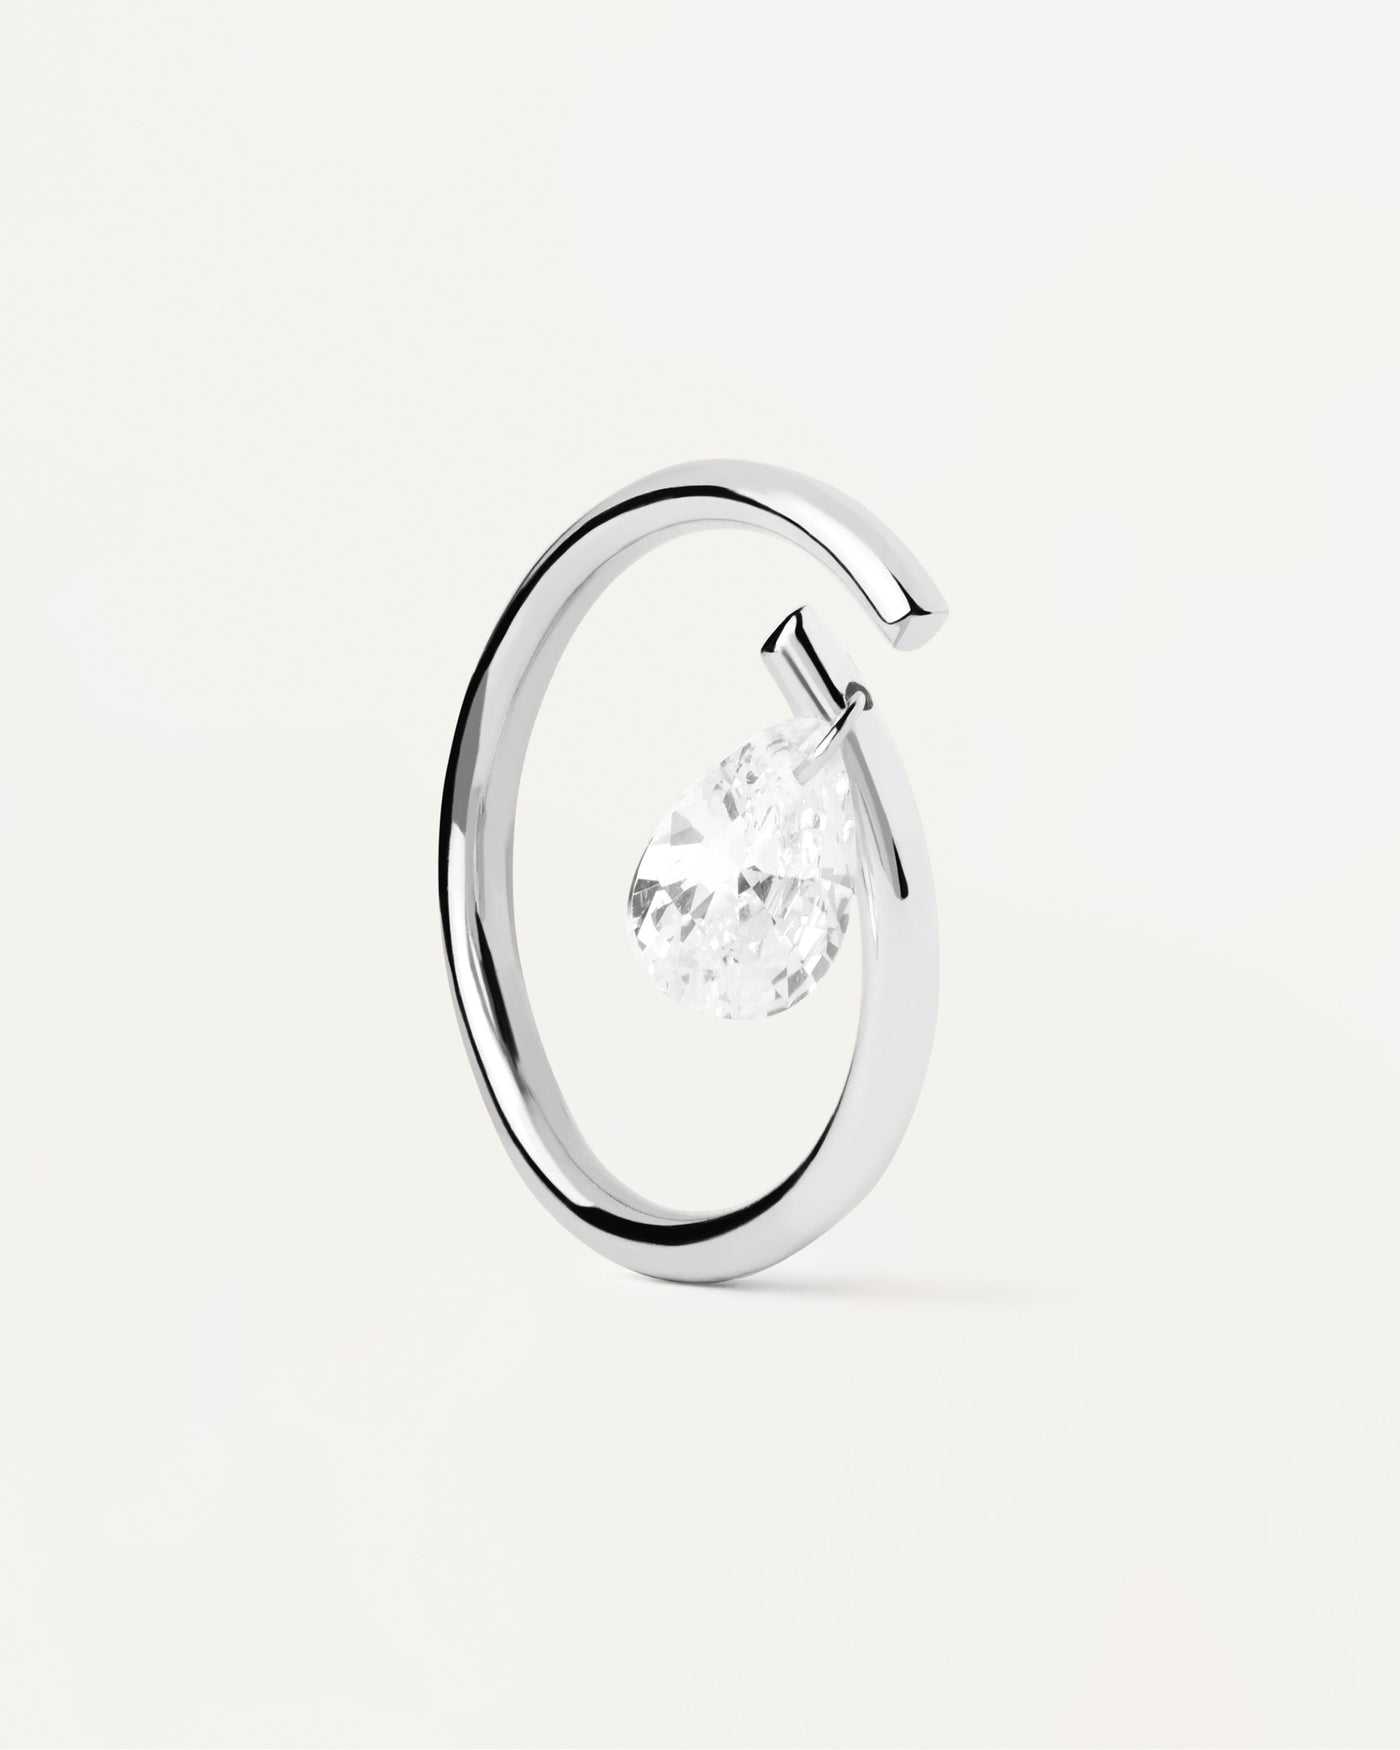 2023 Selection | Aqua Solitaire Silver Ring. Sterling silver open ring with white zirconia drop pendant. Get the latest arrival from PDPAOLA. Place your order safely and get this Best Seller. Free Shipping.